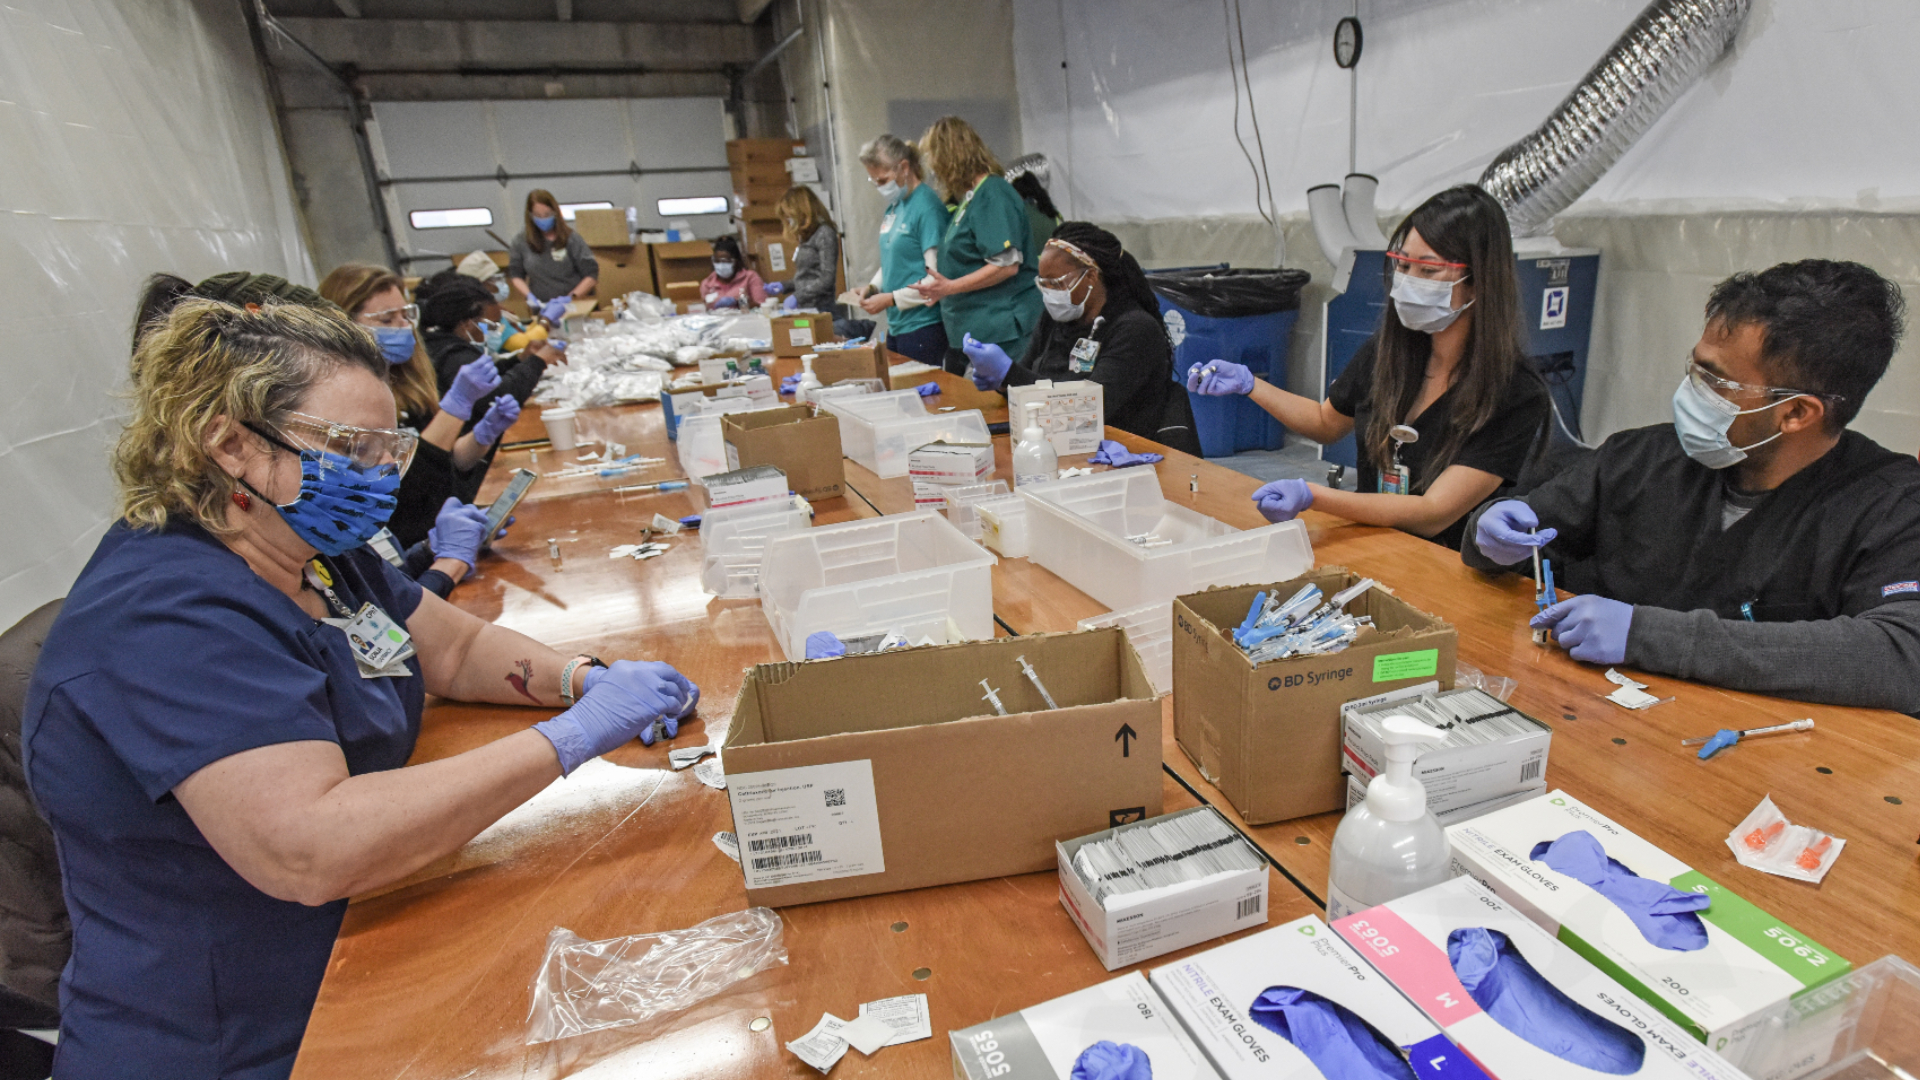 Providing COVID-19 vaccines to thousands of community members within a few days is a massive undertaking. What steps are involved in transporting and preparing COVID-19 vaccines for mass vaccination events? How are safety and training involved? 